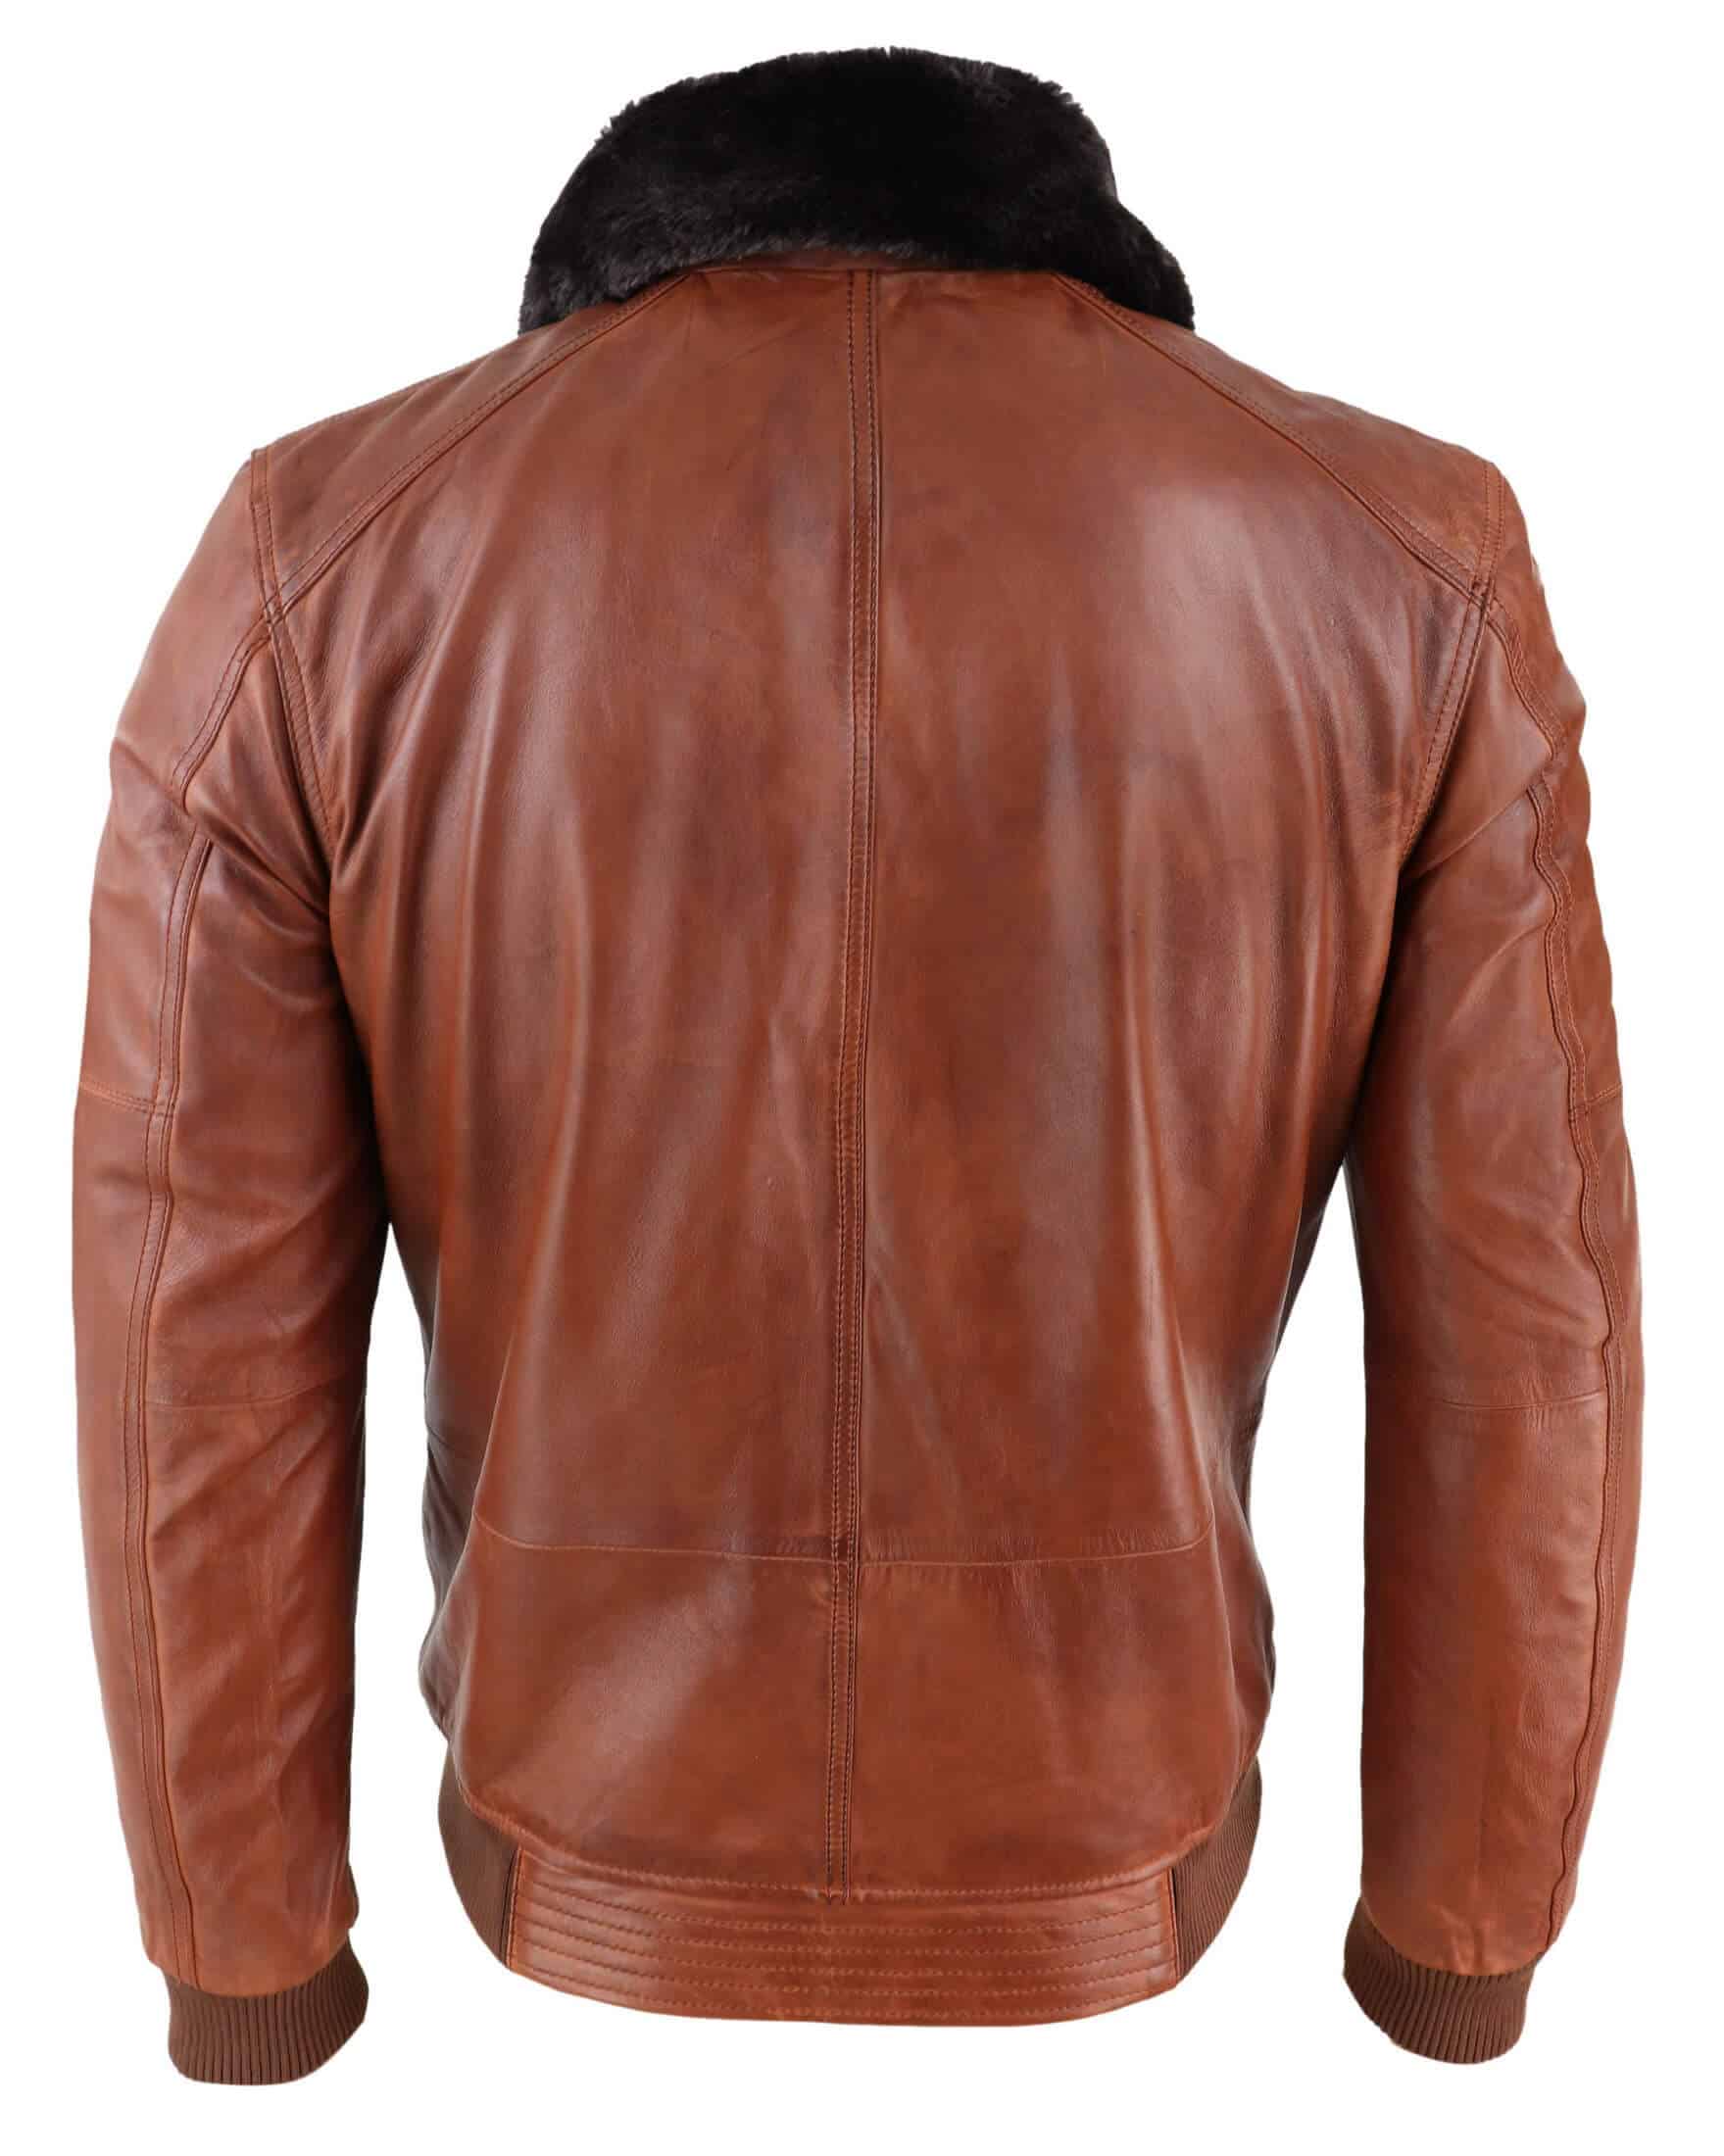 Mens Washed Rust Tan Brown Removable Fur Collar Pilot Leather Jacket ...